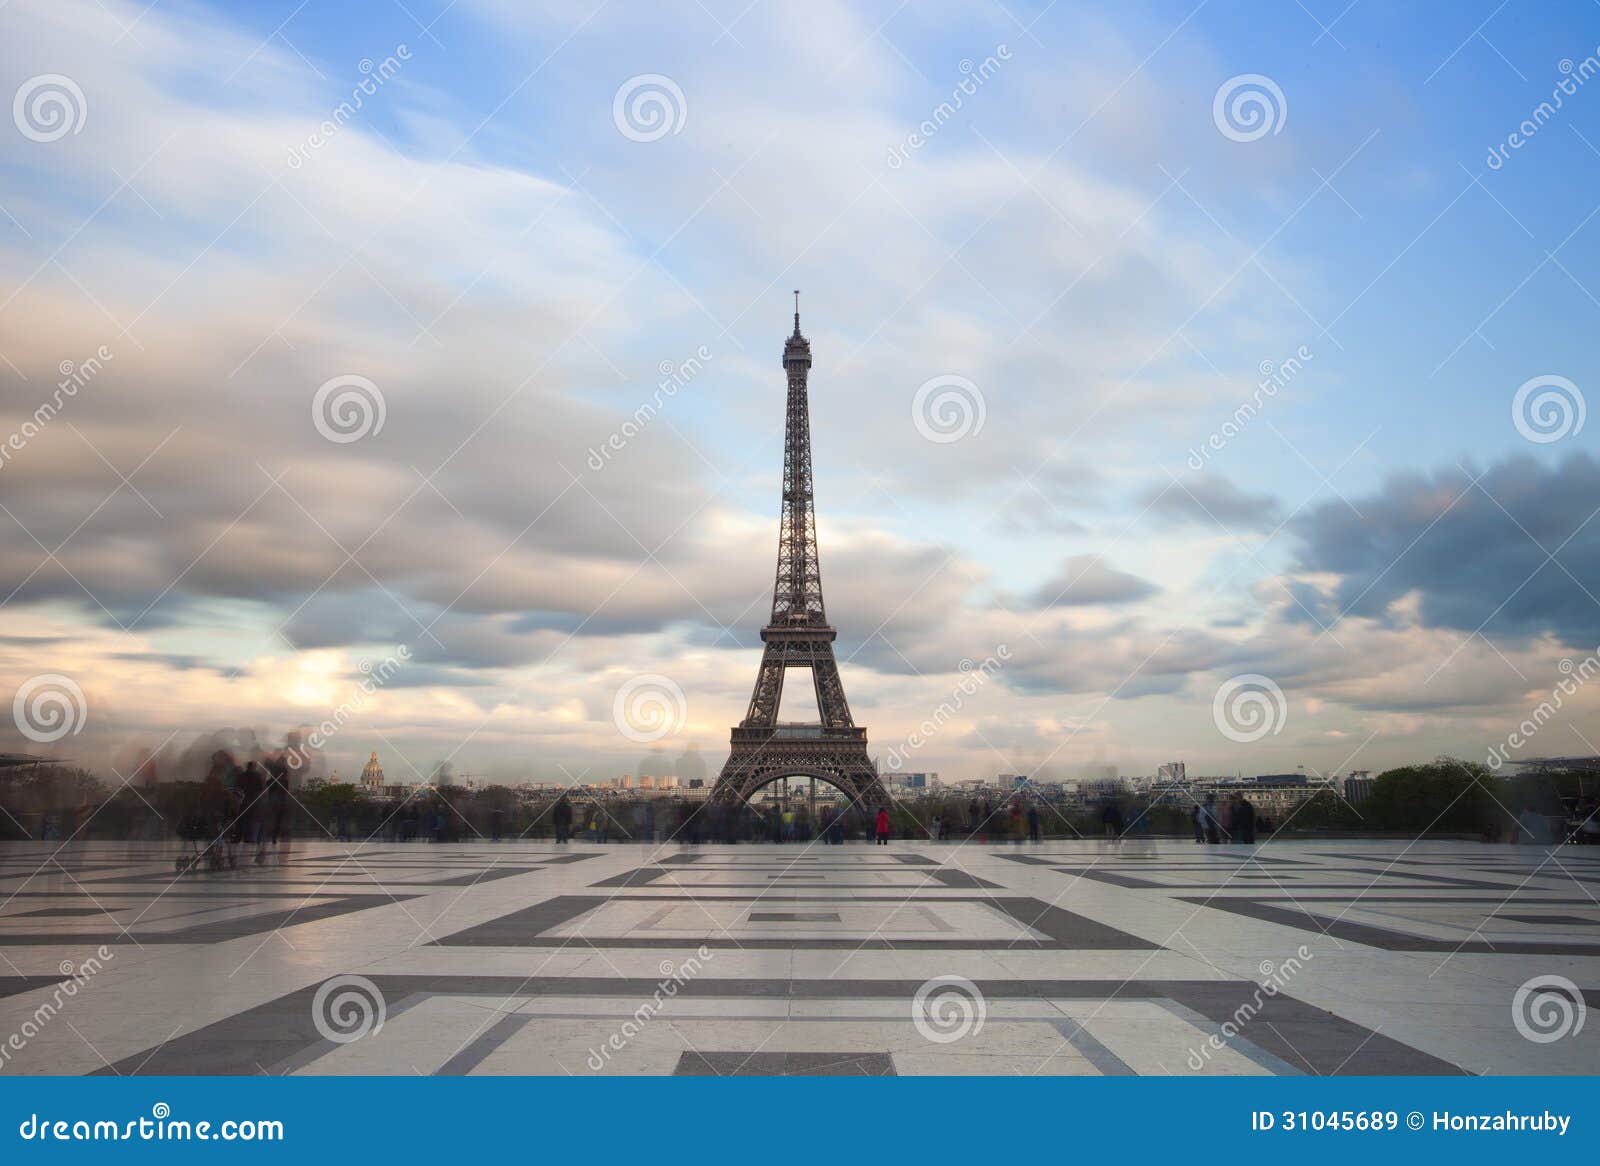 view of the eiffel tower with dramatic sky from trocadero in paris